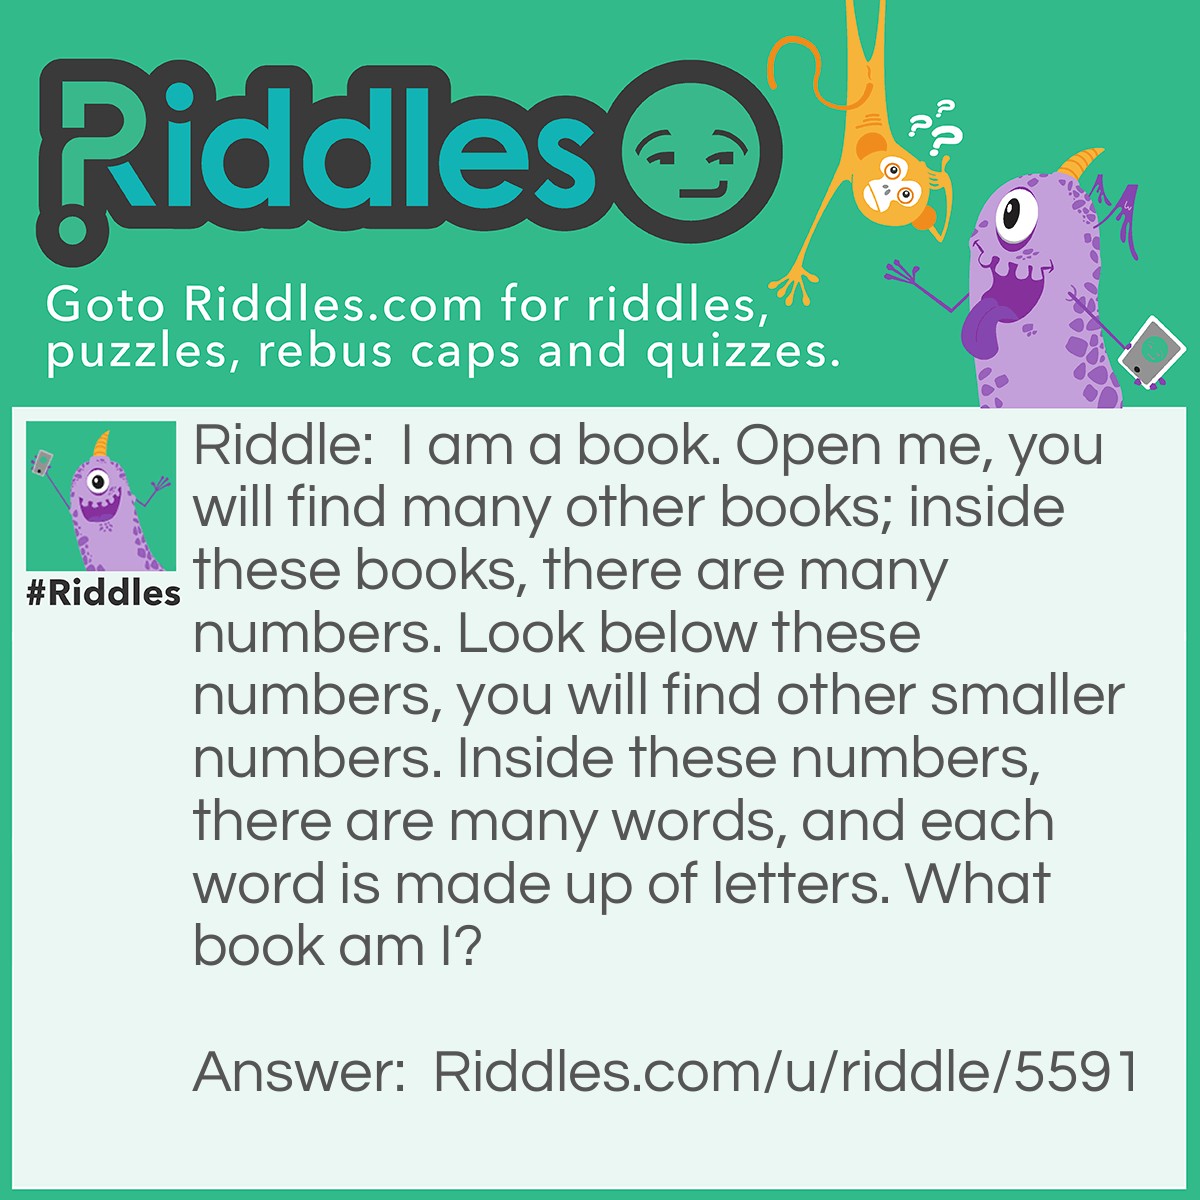 Riddle: I am a book. Open me, you will find many other books; inside these books, there are many numbers. Look below these numbers, you will find other smaller numbers. Inside these numbers, there are many words, and each word is made up of letters. What book am I? Answer: I am a Bible. The bible is book that has other books like Genesis, Exodus,... Revelation. Each book e.g Genesis has numbers called chapters. Each chapters has other numbers called the verses and each verse contain words and letters. You Didn't Got It, Right?